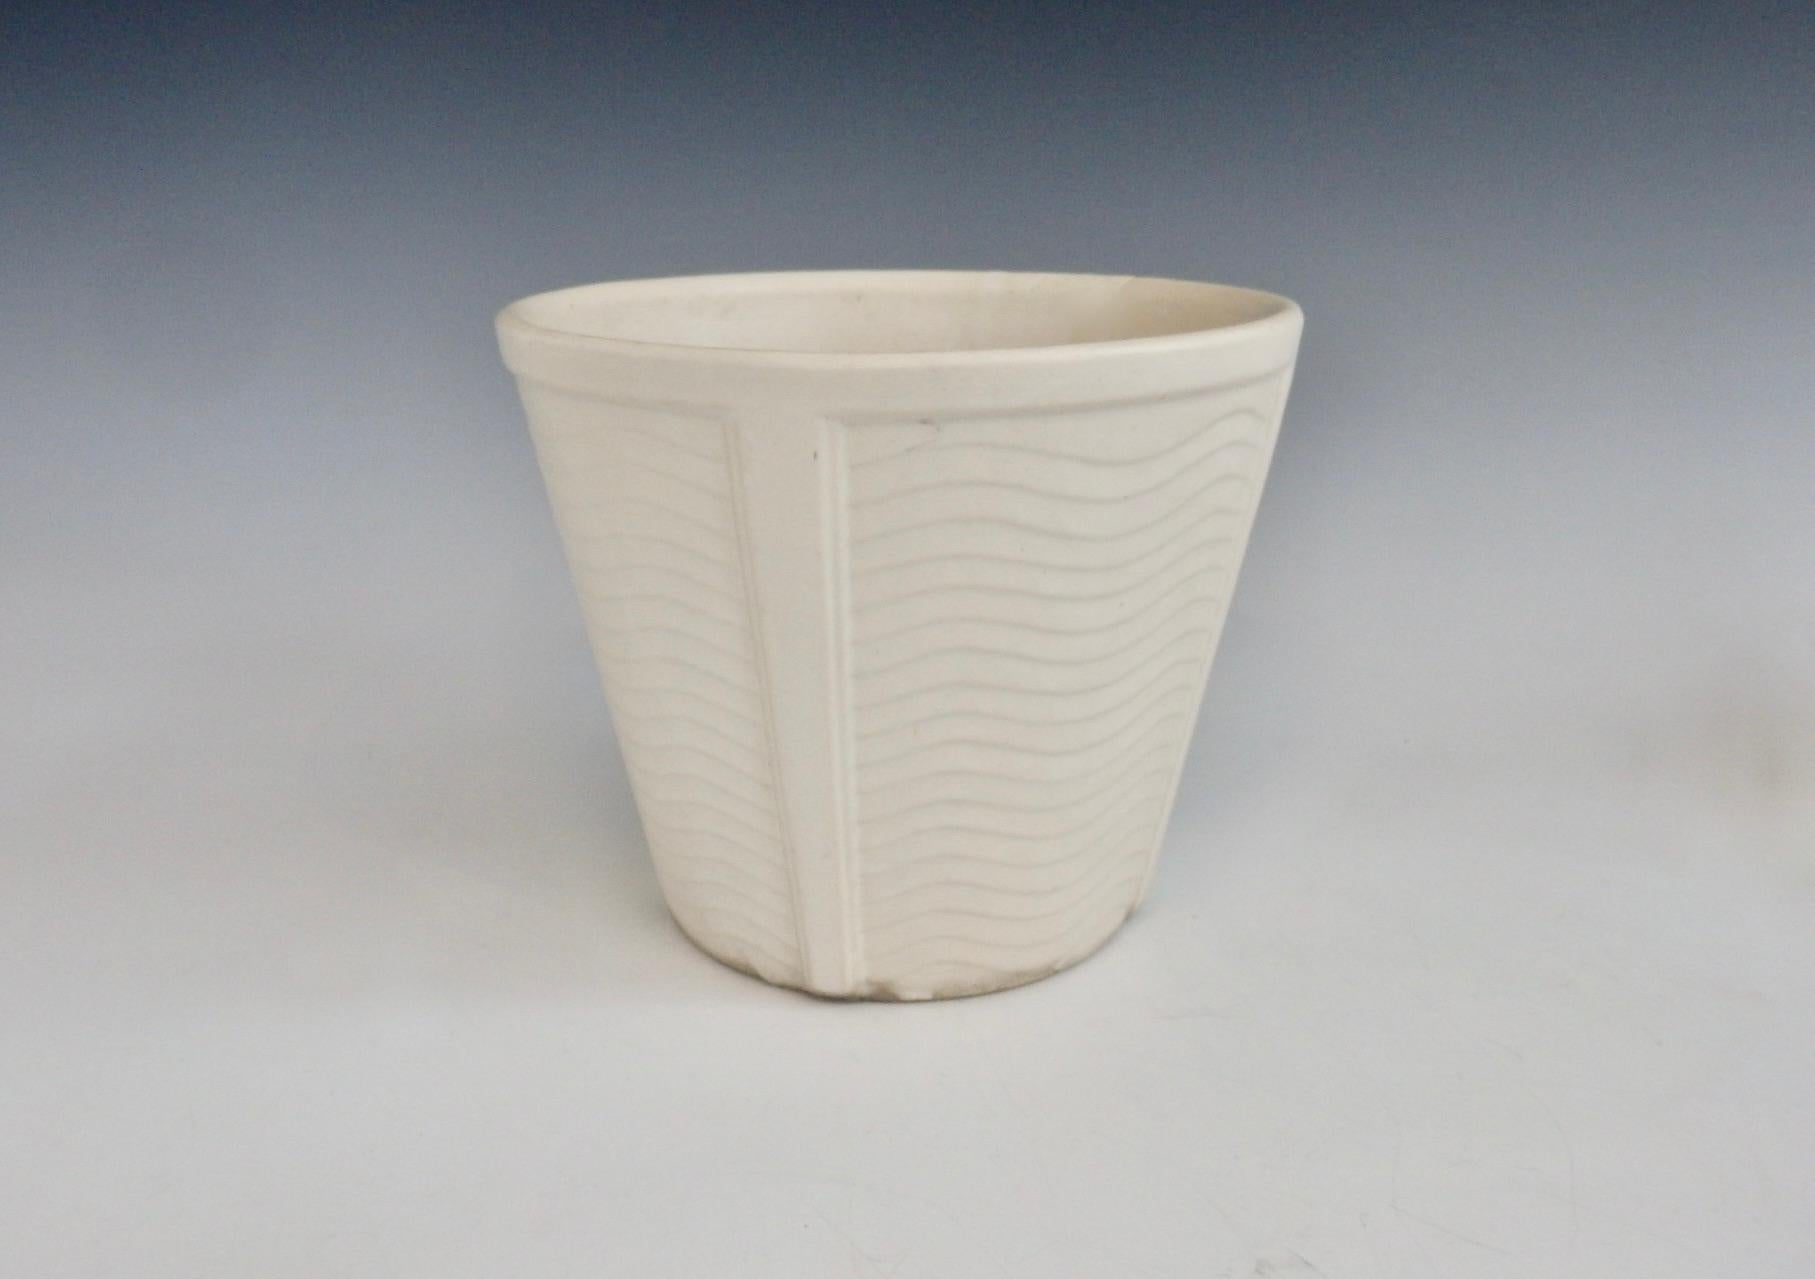 Substantial body Art Deco styled planter pot. Tapers up from 6.75